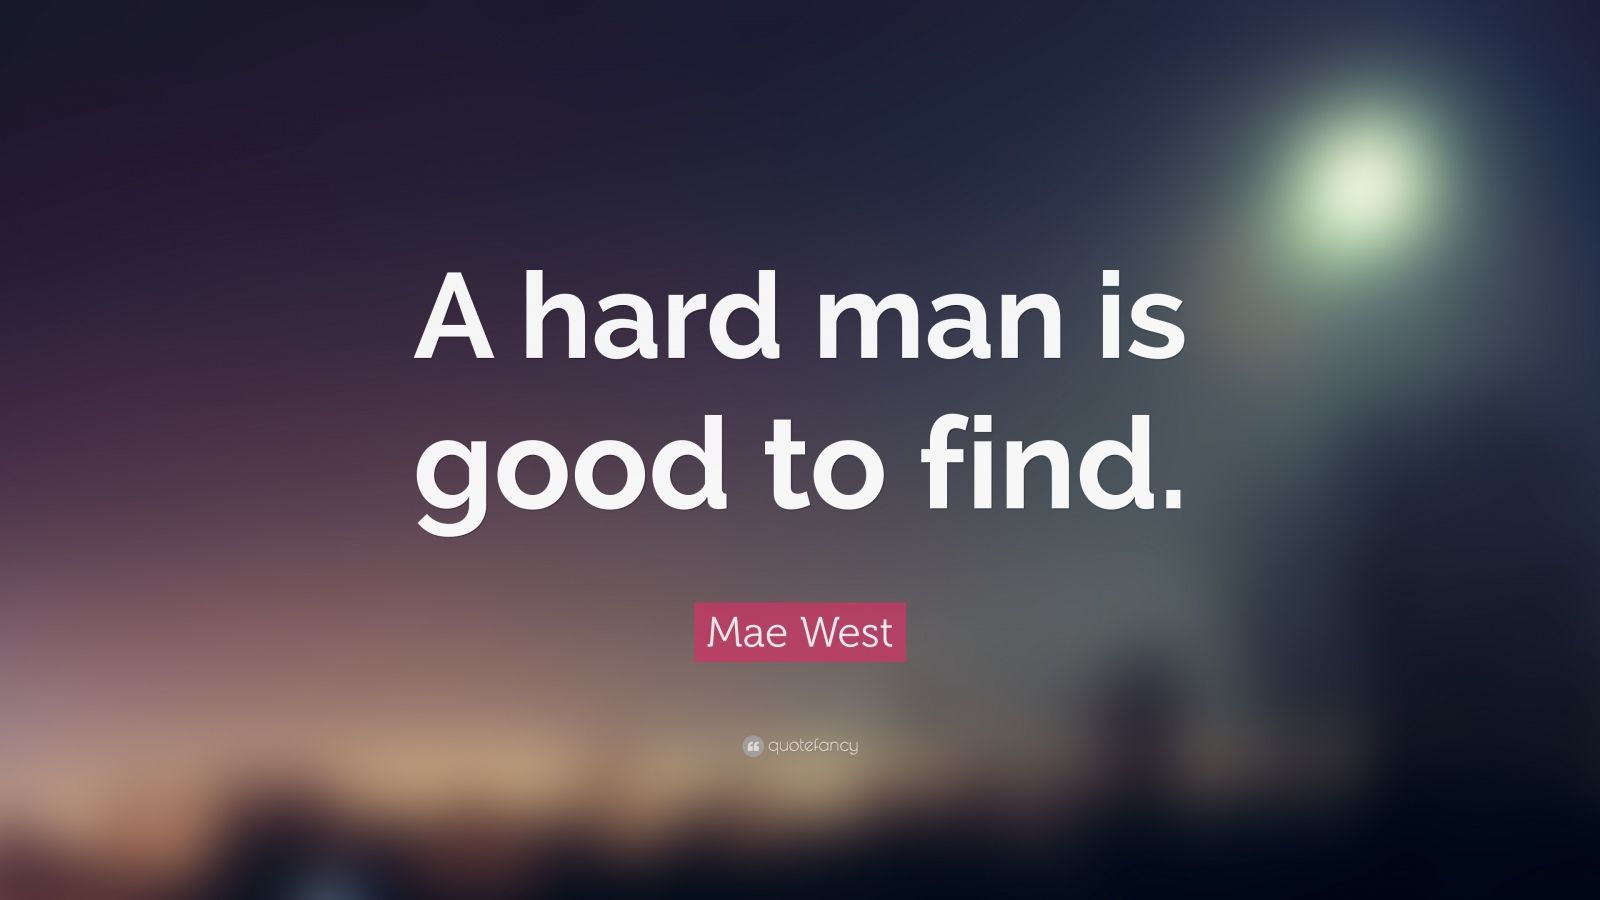 a good man is hard to find religion essay